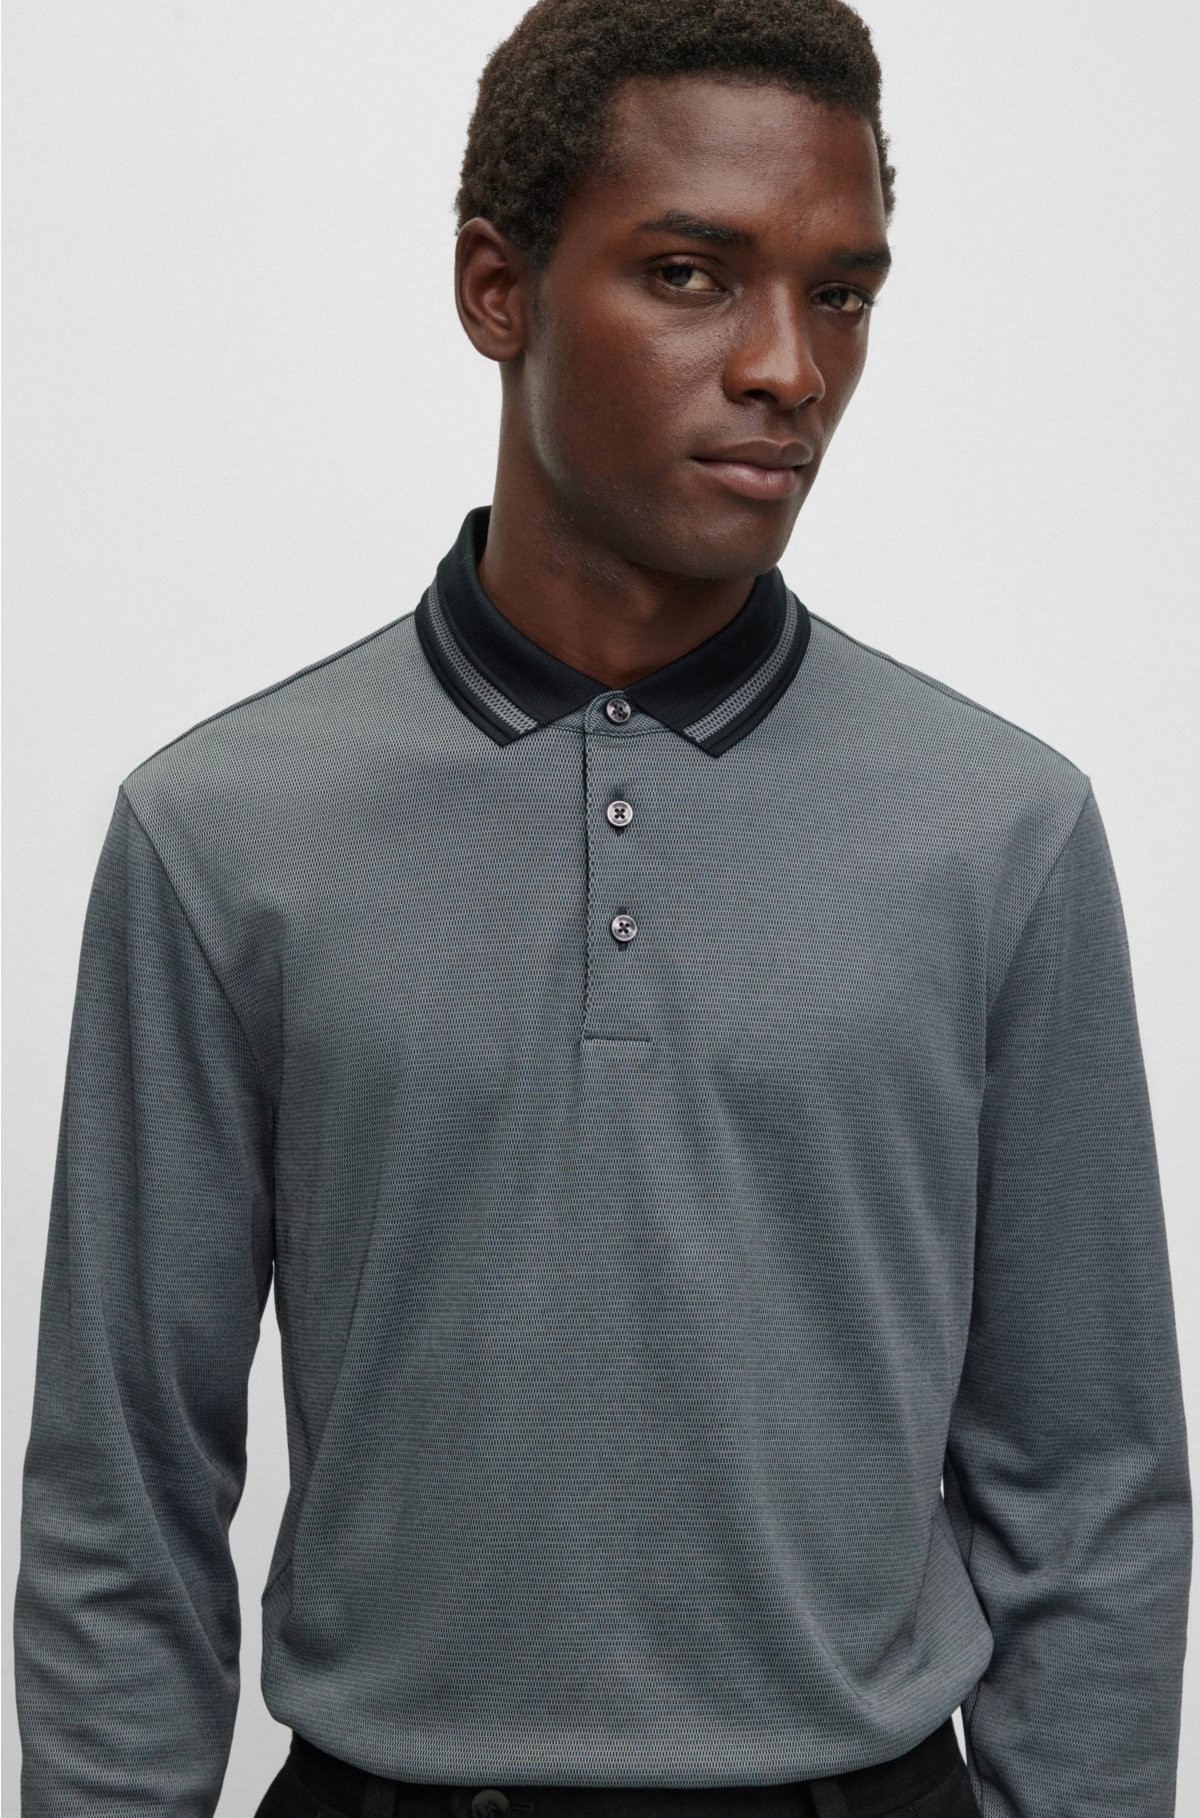 Slim-fit long-sleeved polo shirt with woven pattern, Black